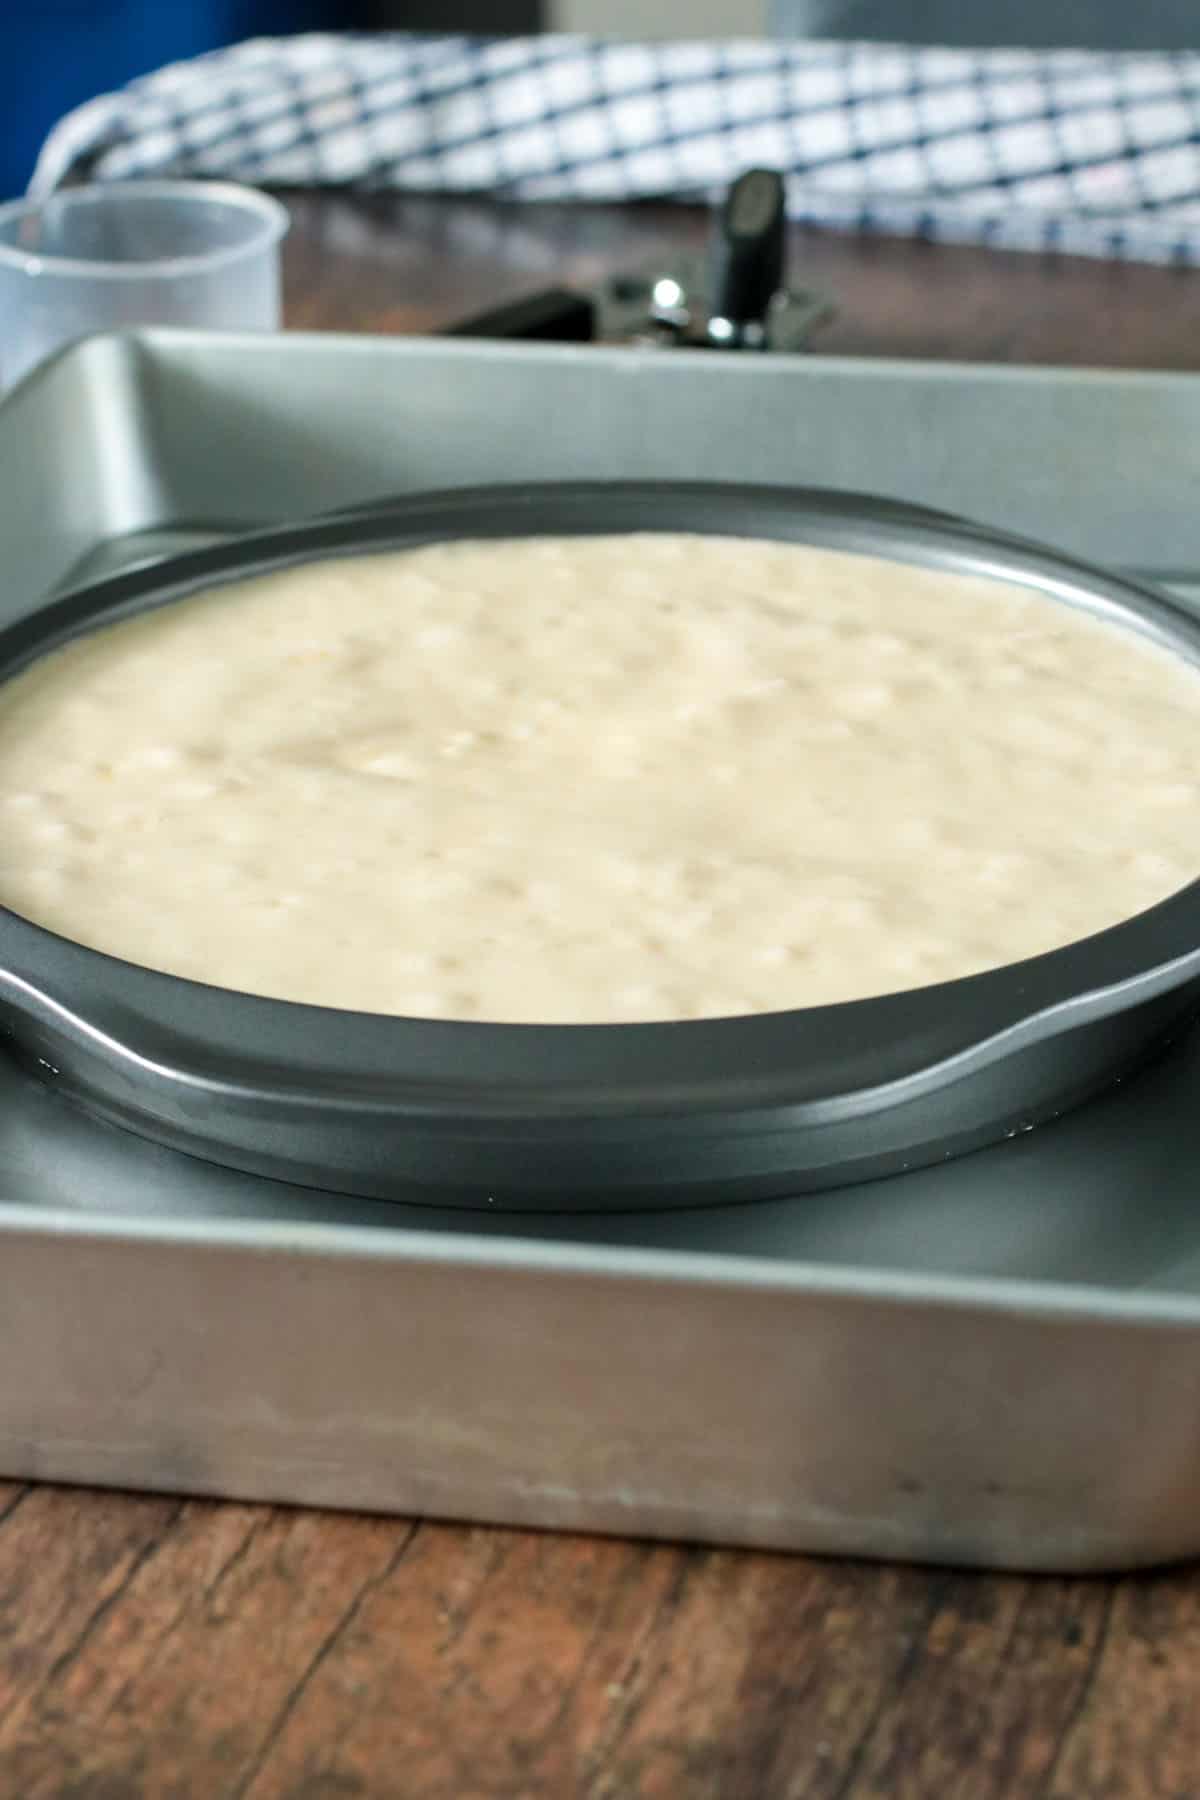 The custard cake batter in the pan, ready for baking in a waterbath set up.